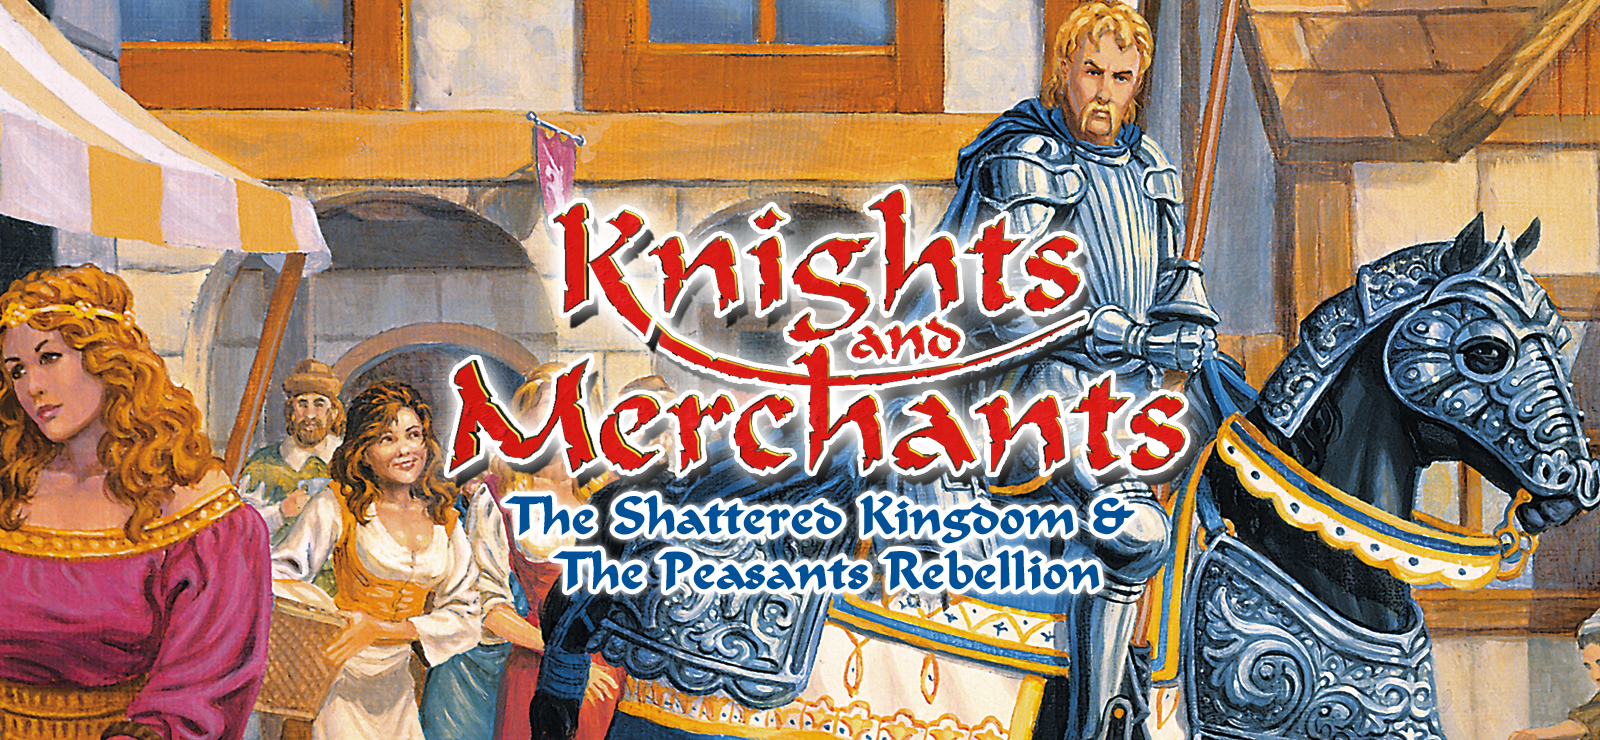 Knights And Merchants